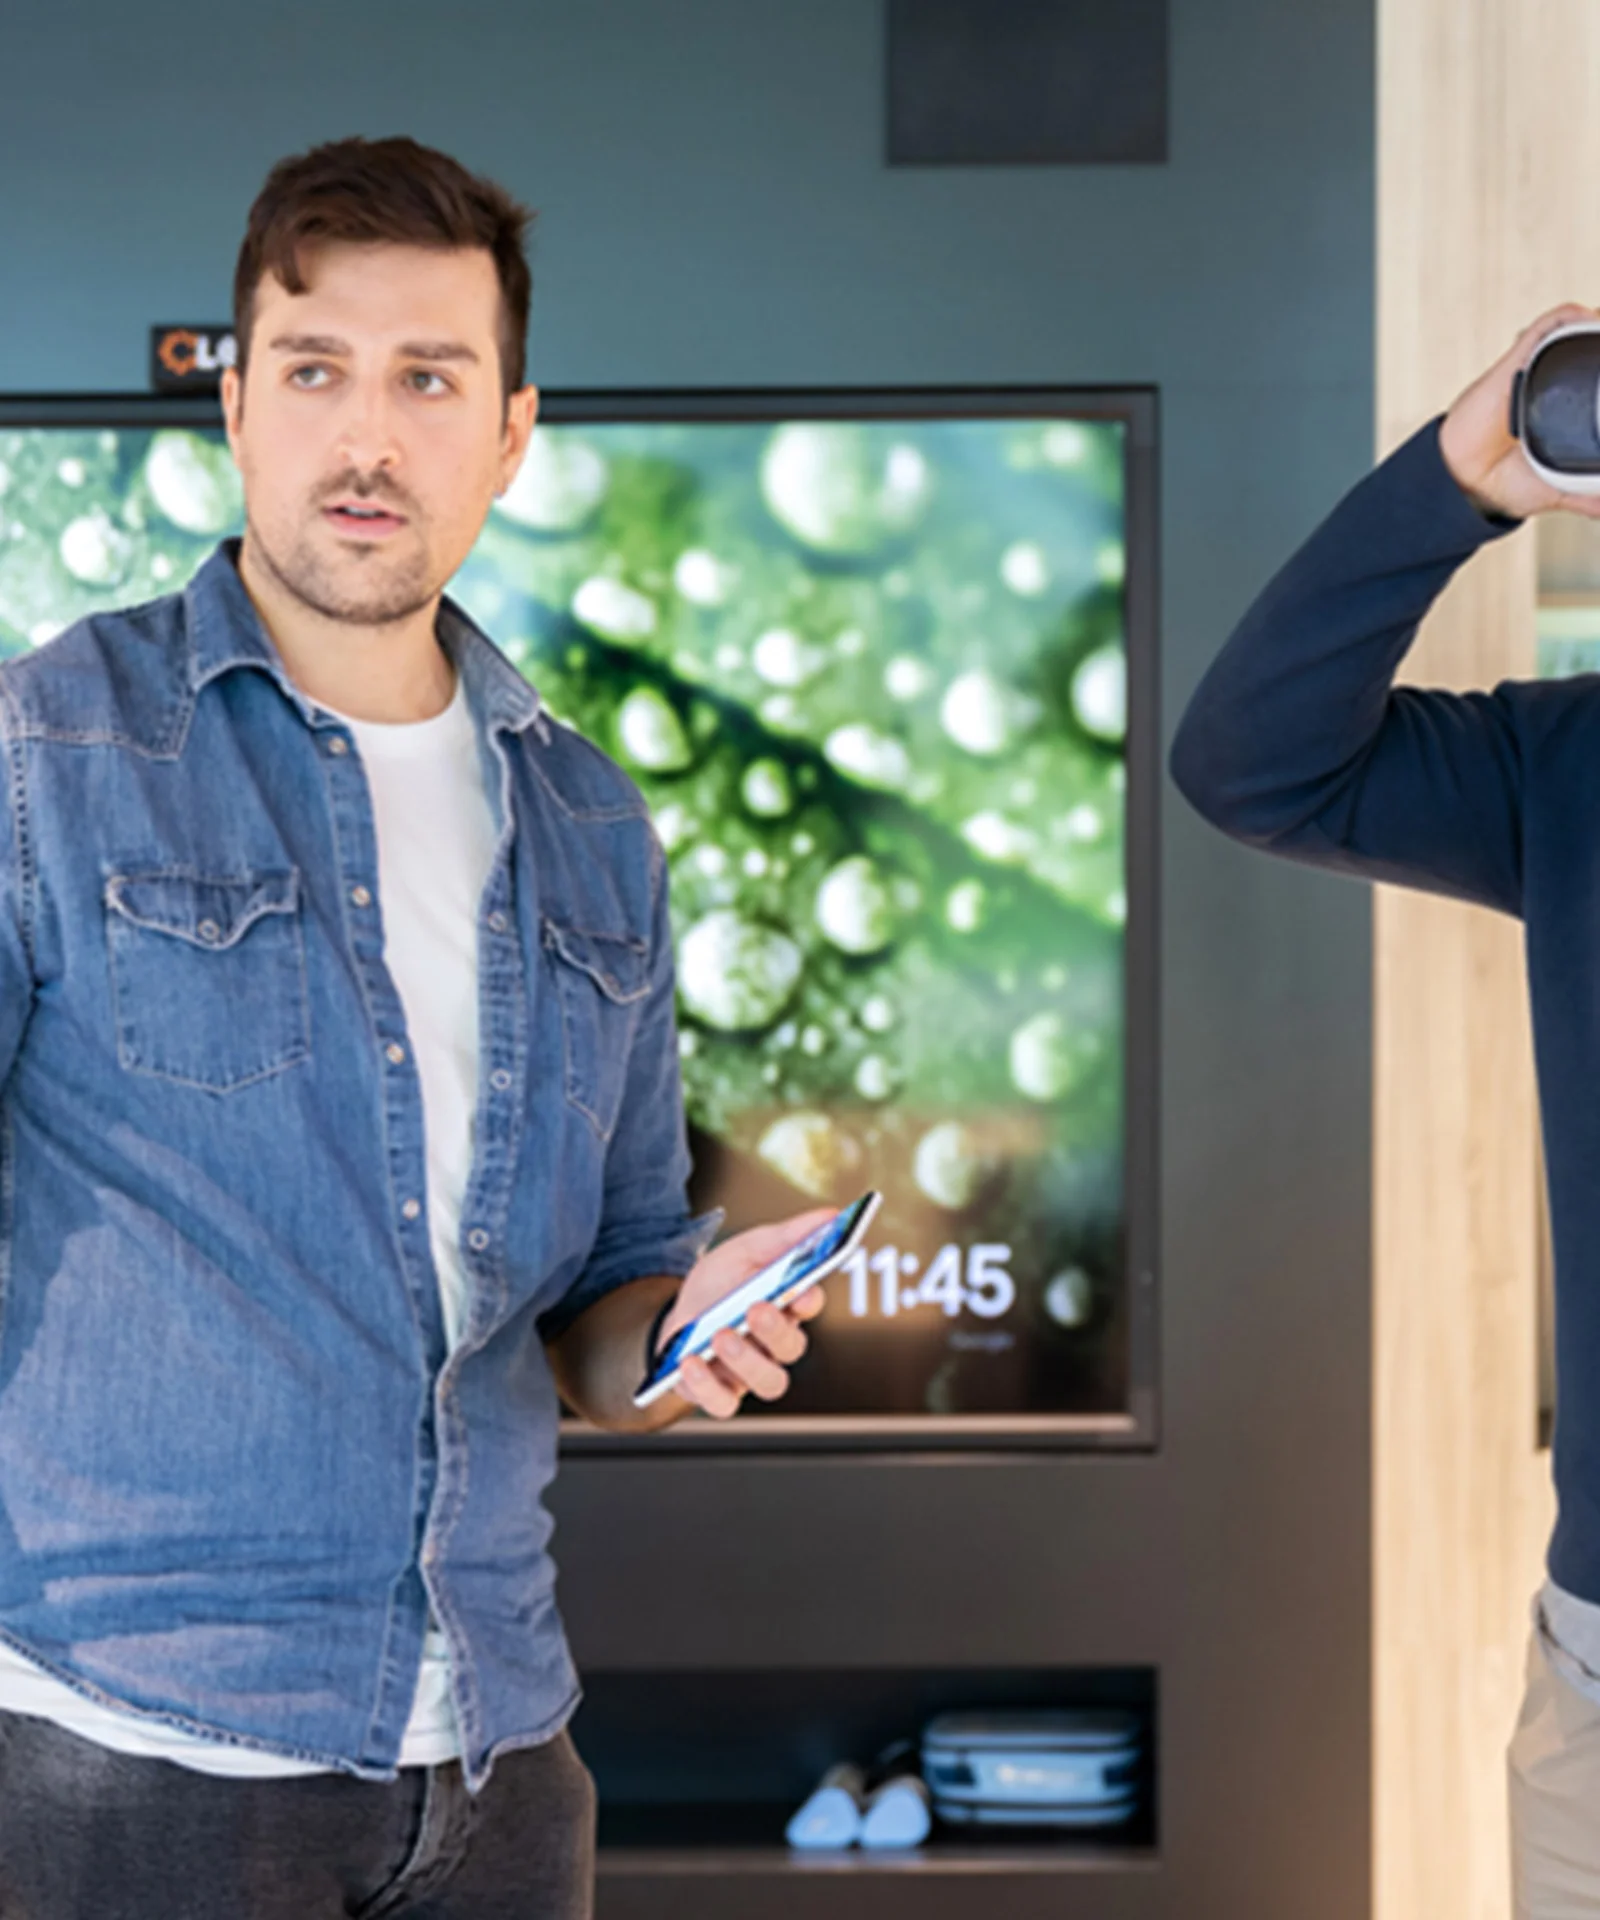 This image captures an interactive session in an innovation lab where two men are engaging with advanced technologies. One man is wearing a virtual reality headset, experiencing immersive content, while the other man is holding a smartphone and possibly explaining or presenting something. The background features a large screen displaying vivid visuals, enhancing the modern and tech-centric ambiance of the innovation lab. This setting reflects the integration of cutting-edge technologies and collaborative environments aimed at fostering innovation and creativity.